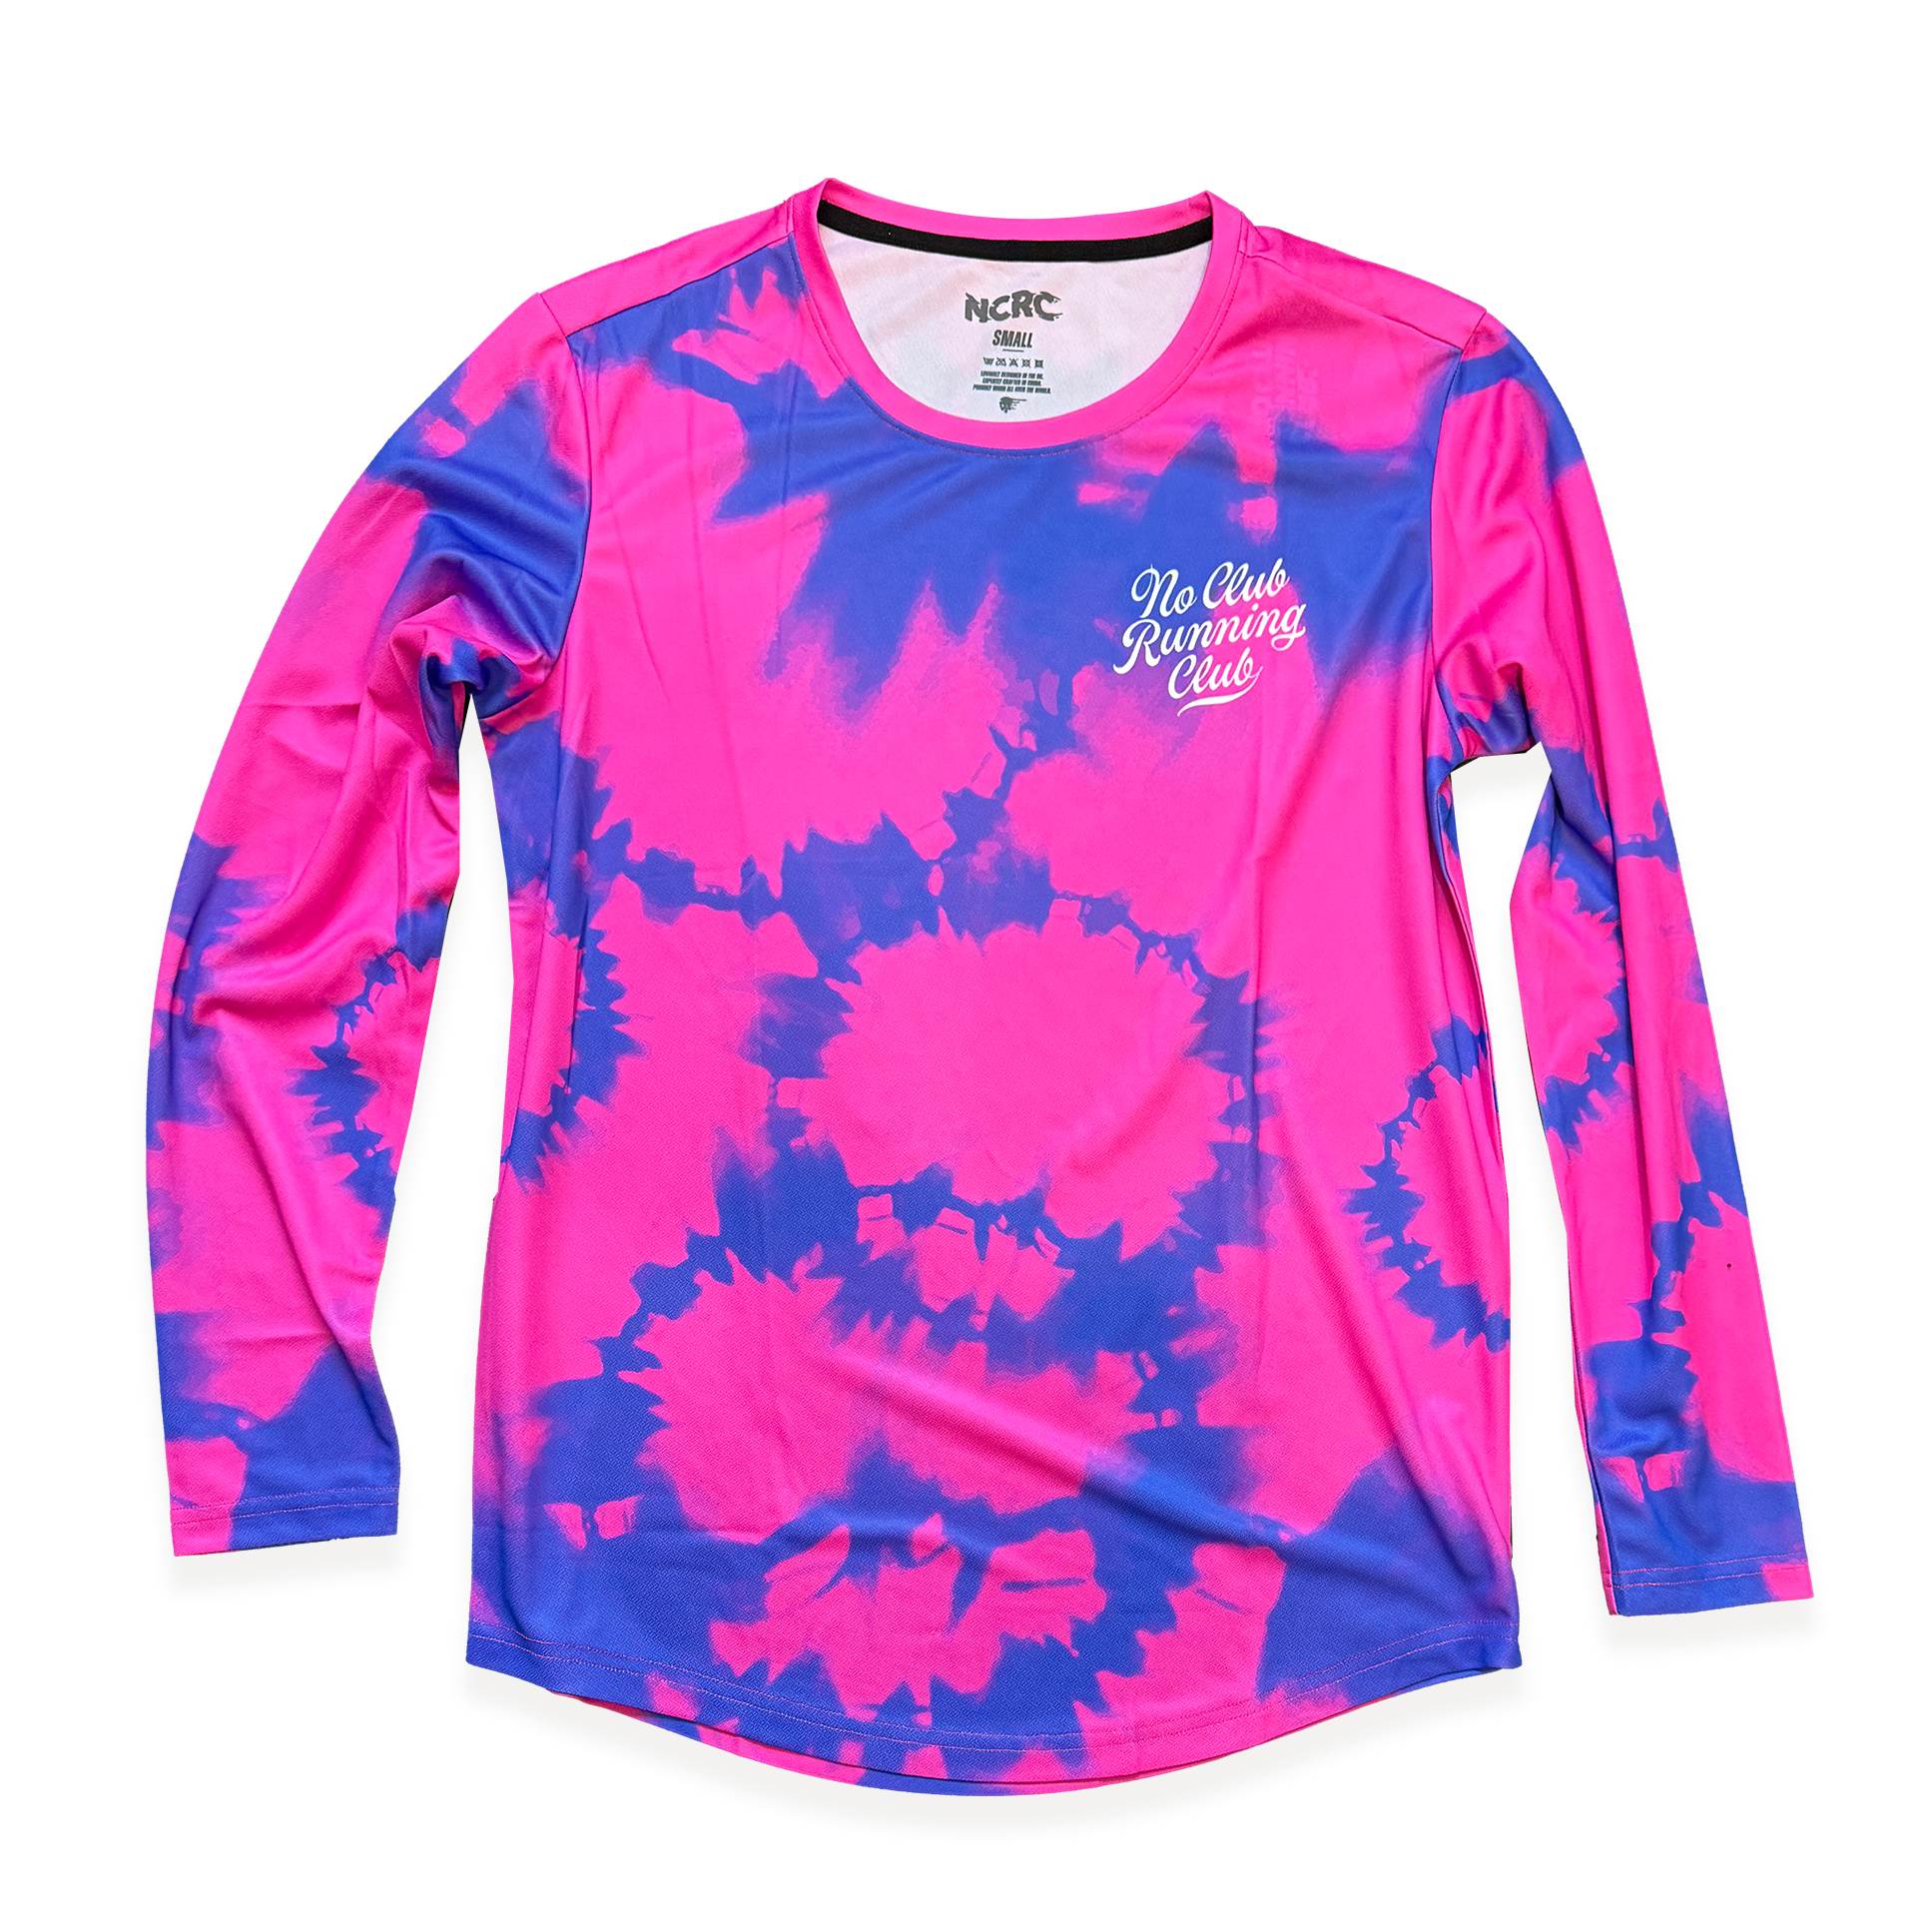 NCRC: Unisex Fits: Heritage Tie Dye -  Long Sleeve Training Jersey - Pink/Blue/White